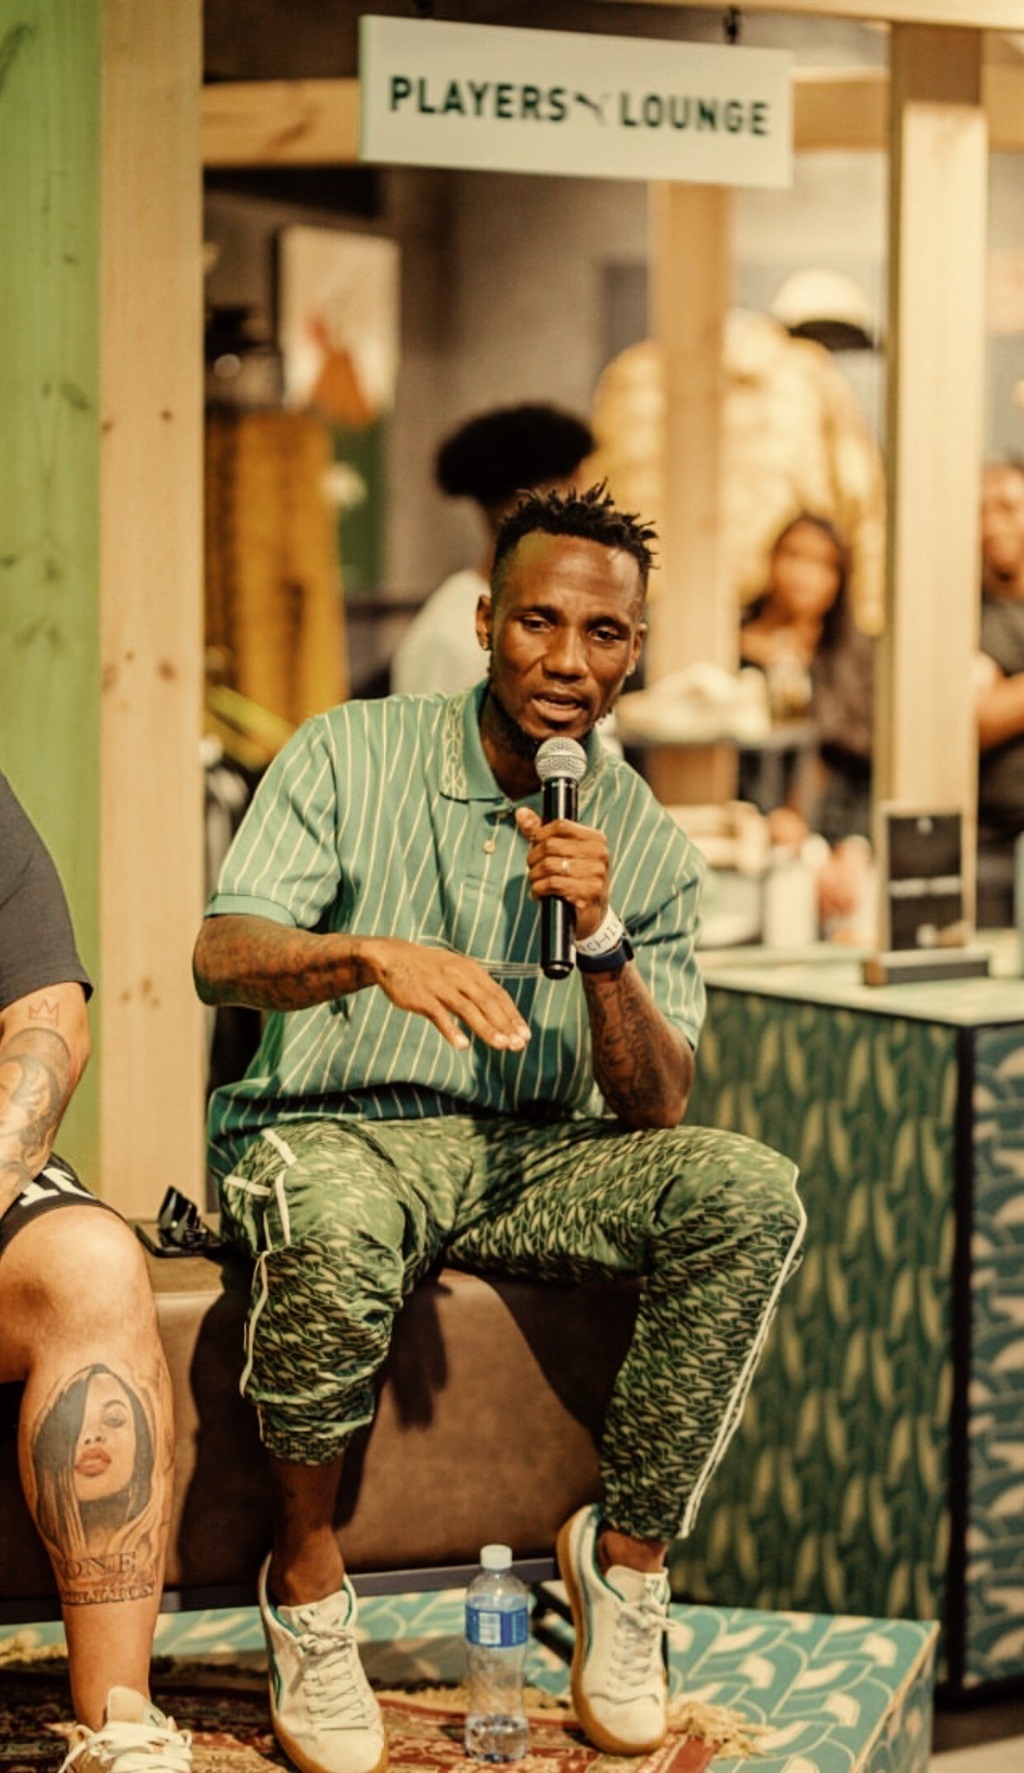 Teko Modise at the PUMA Players' Lounge Collection